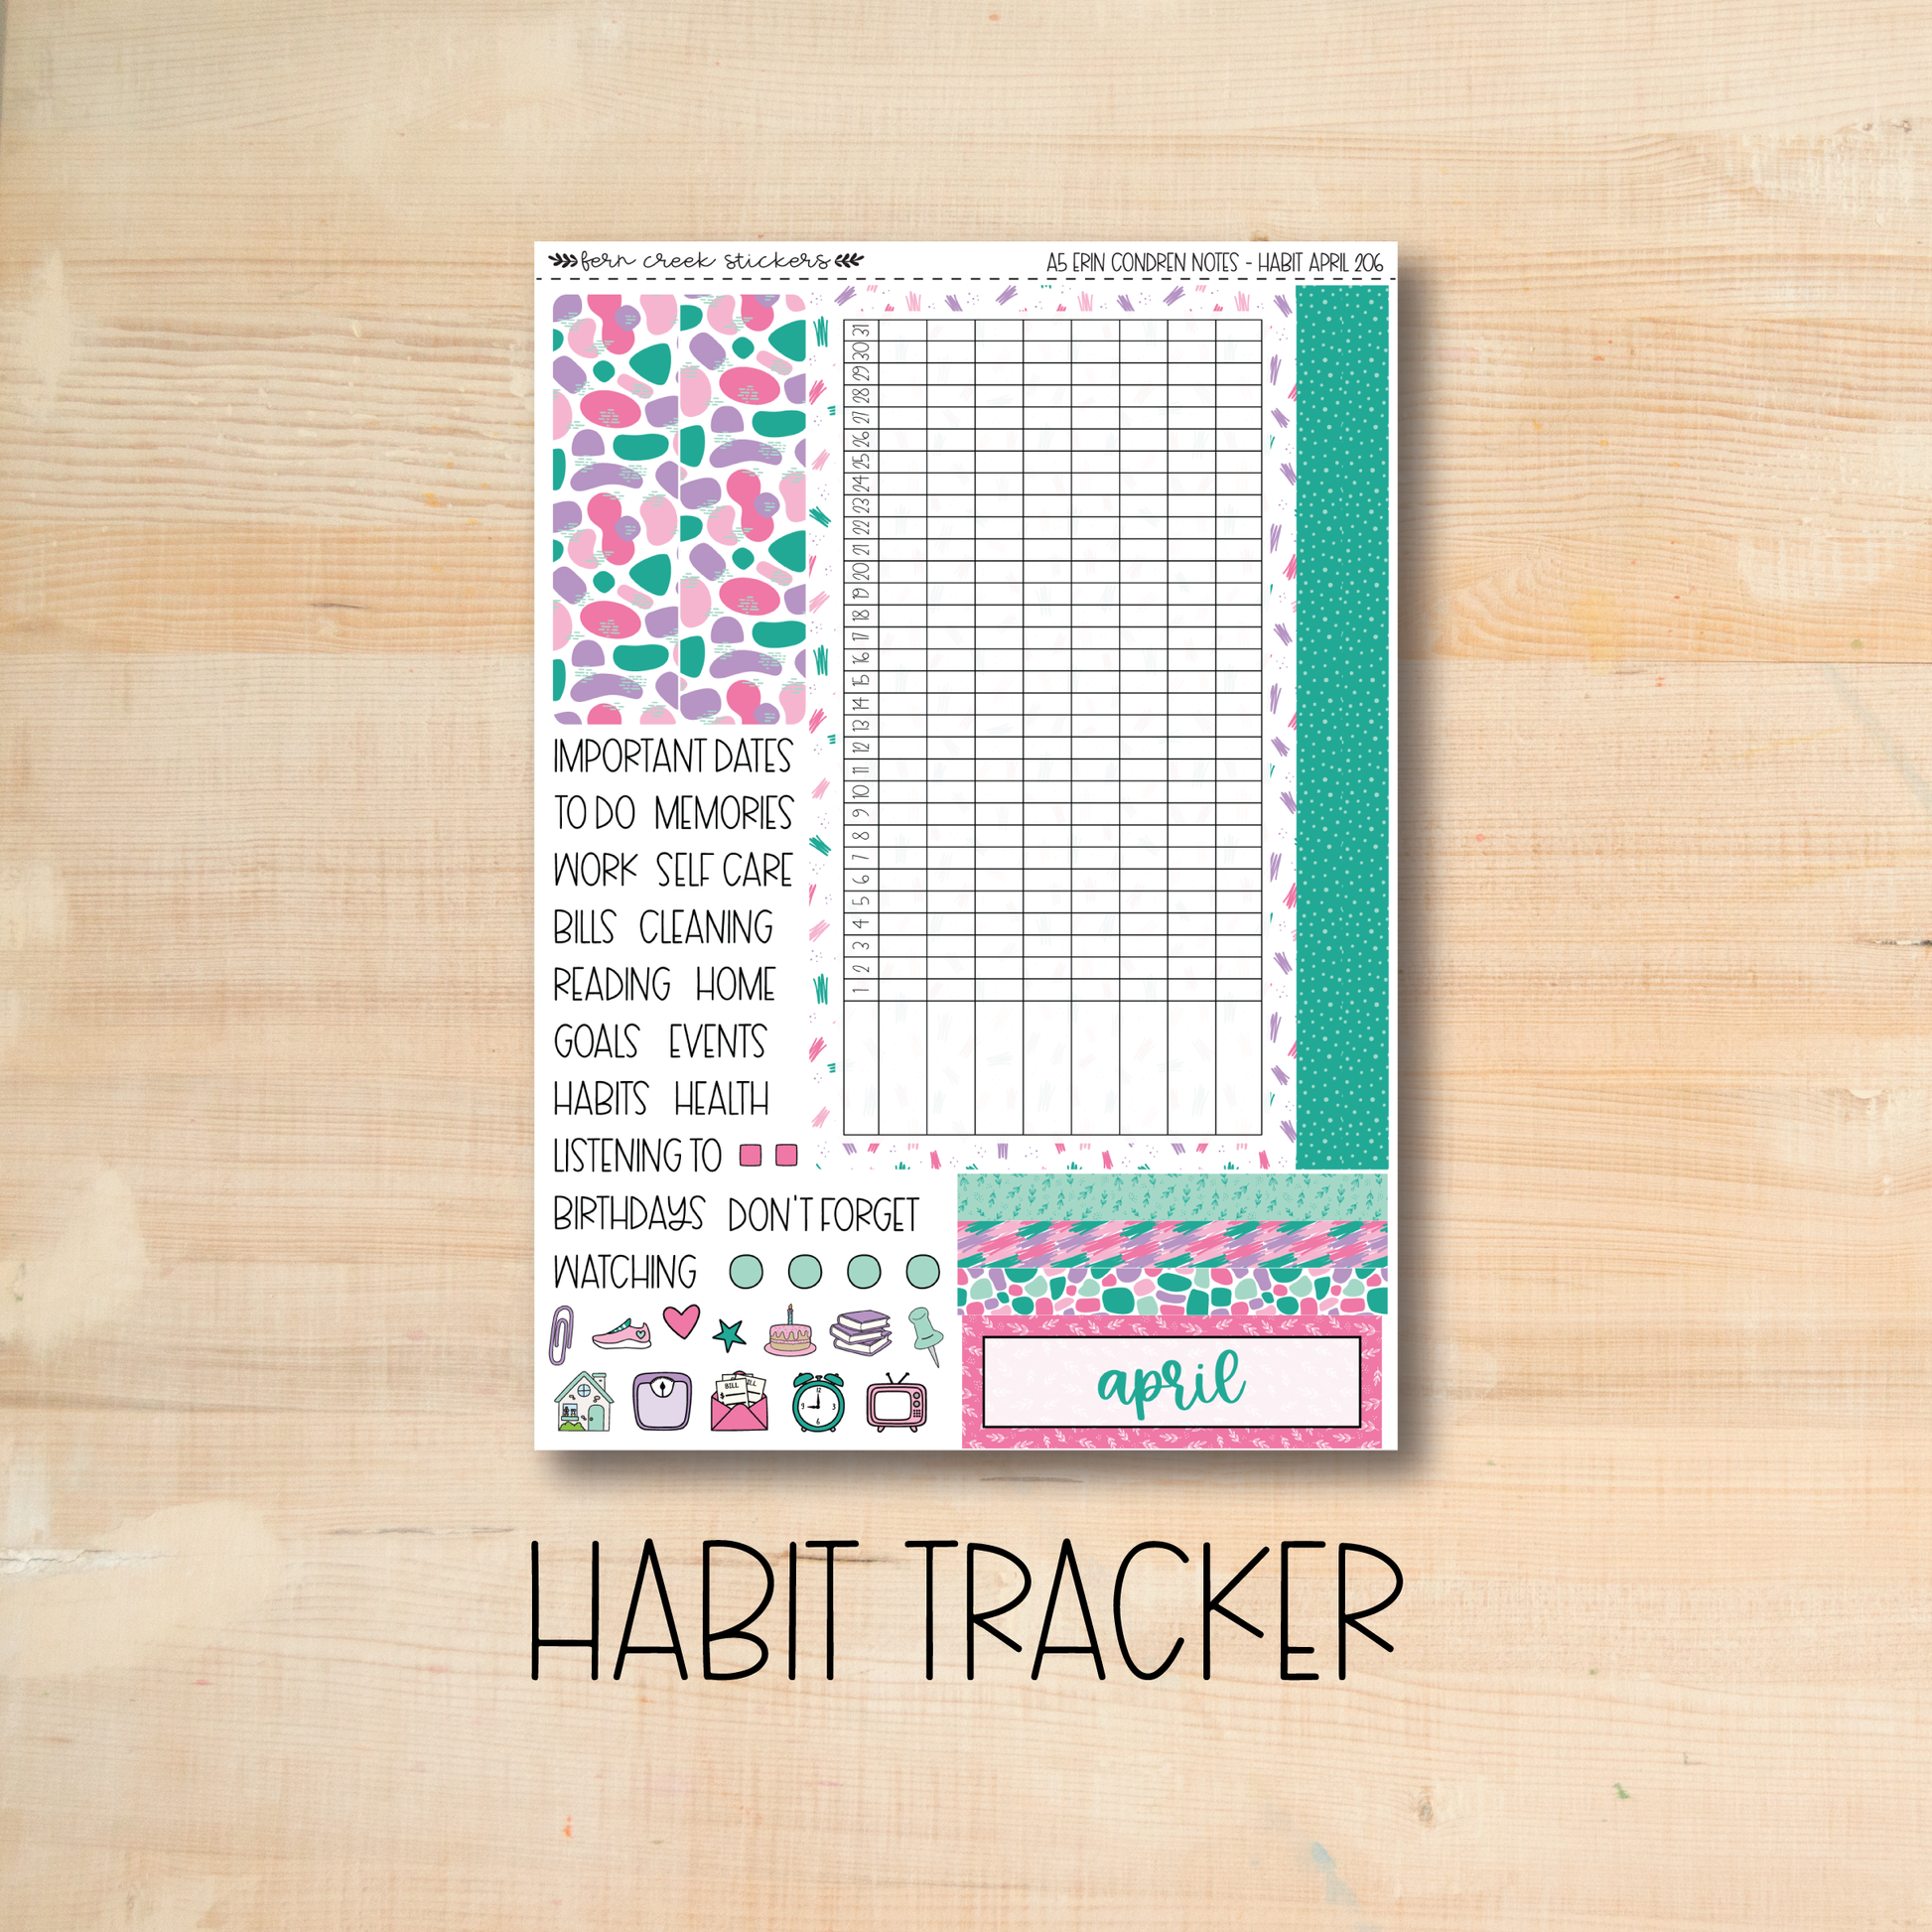 the habit tracker sticker is shown on a wooden surface